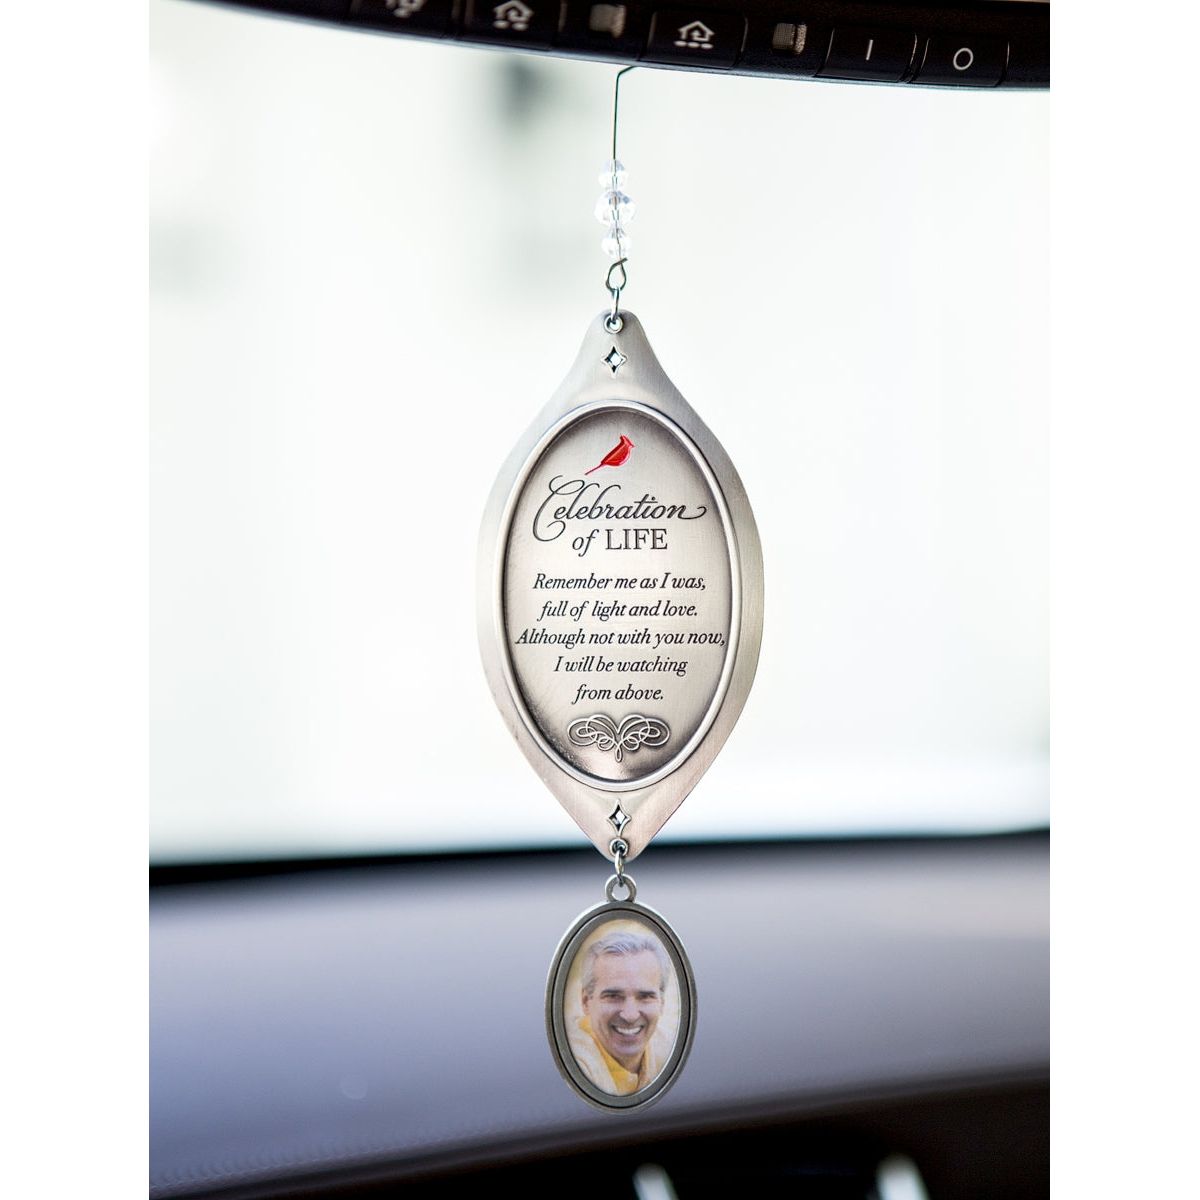 Celebration of Life ornament hanging from a rearview mirror.